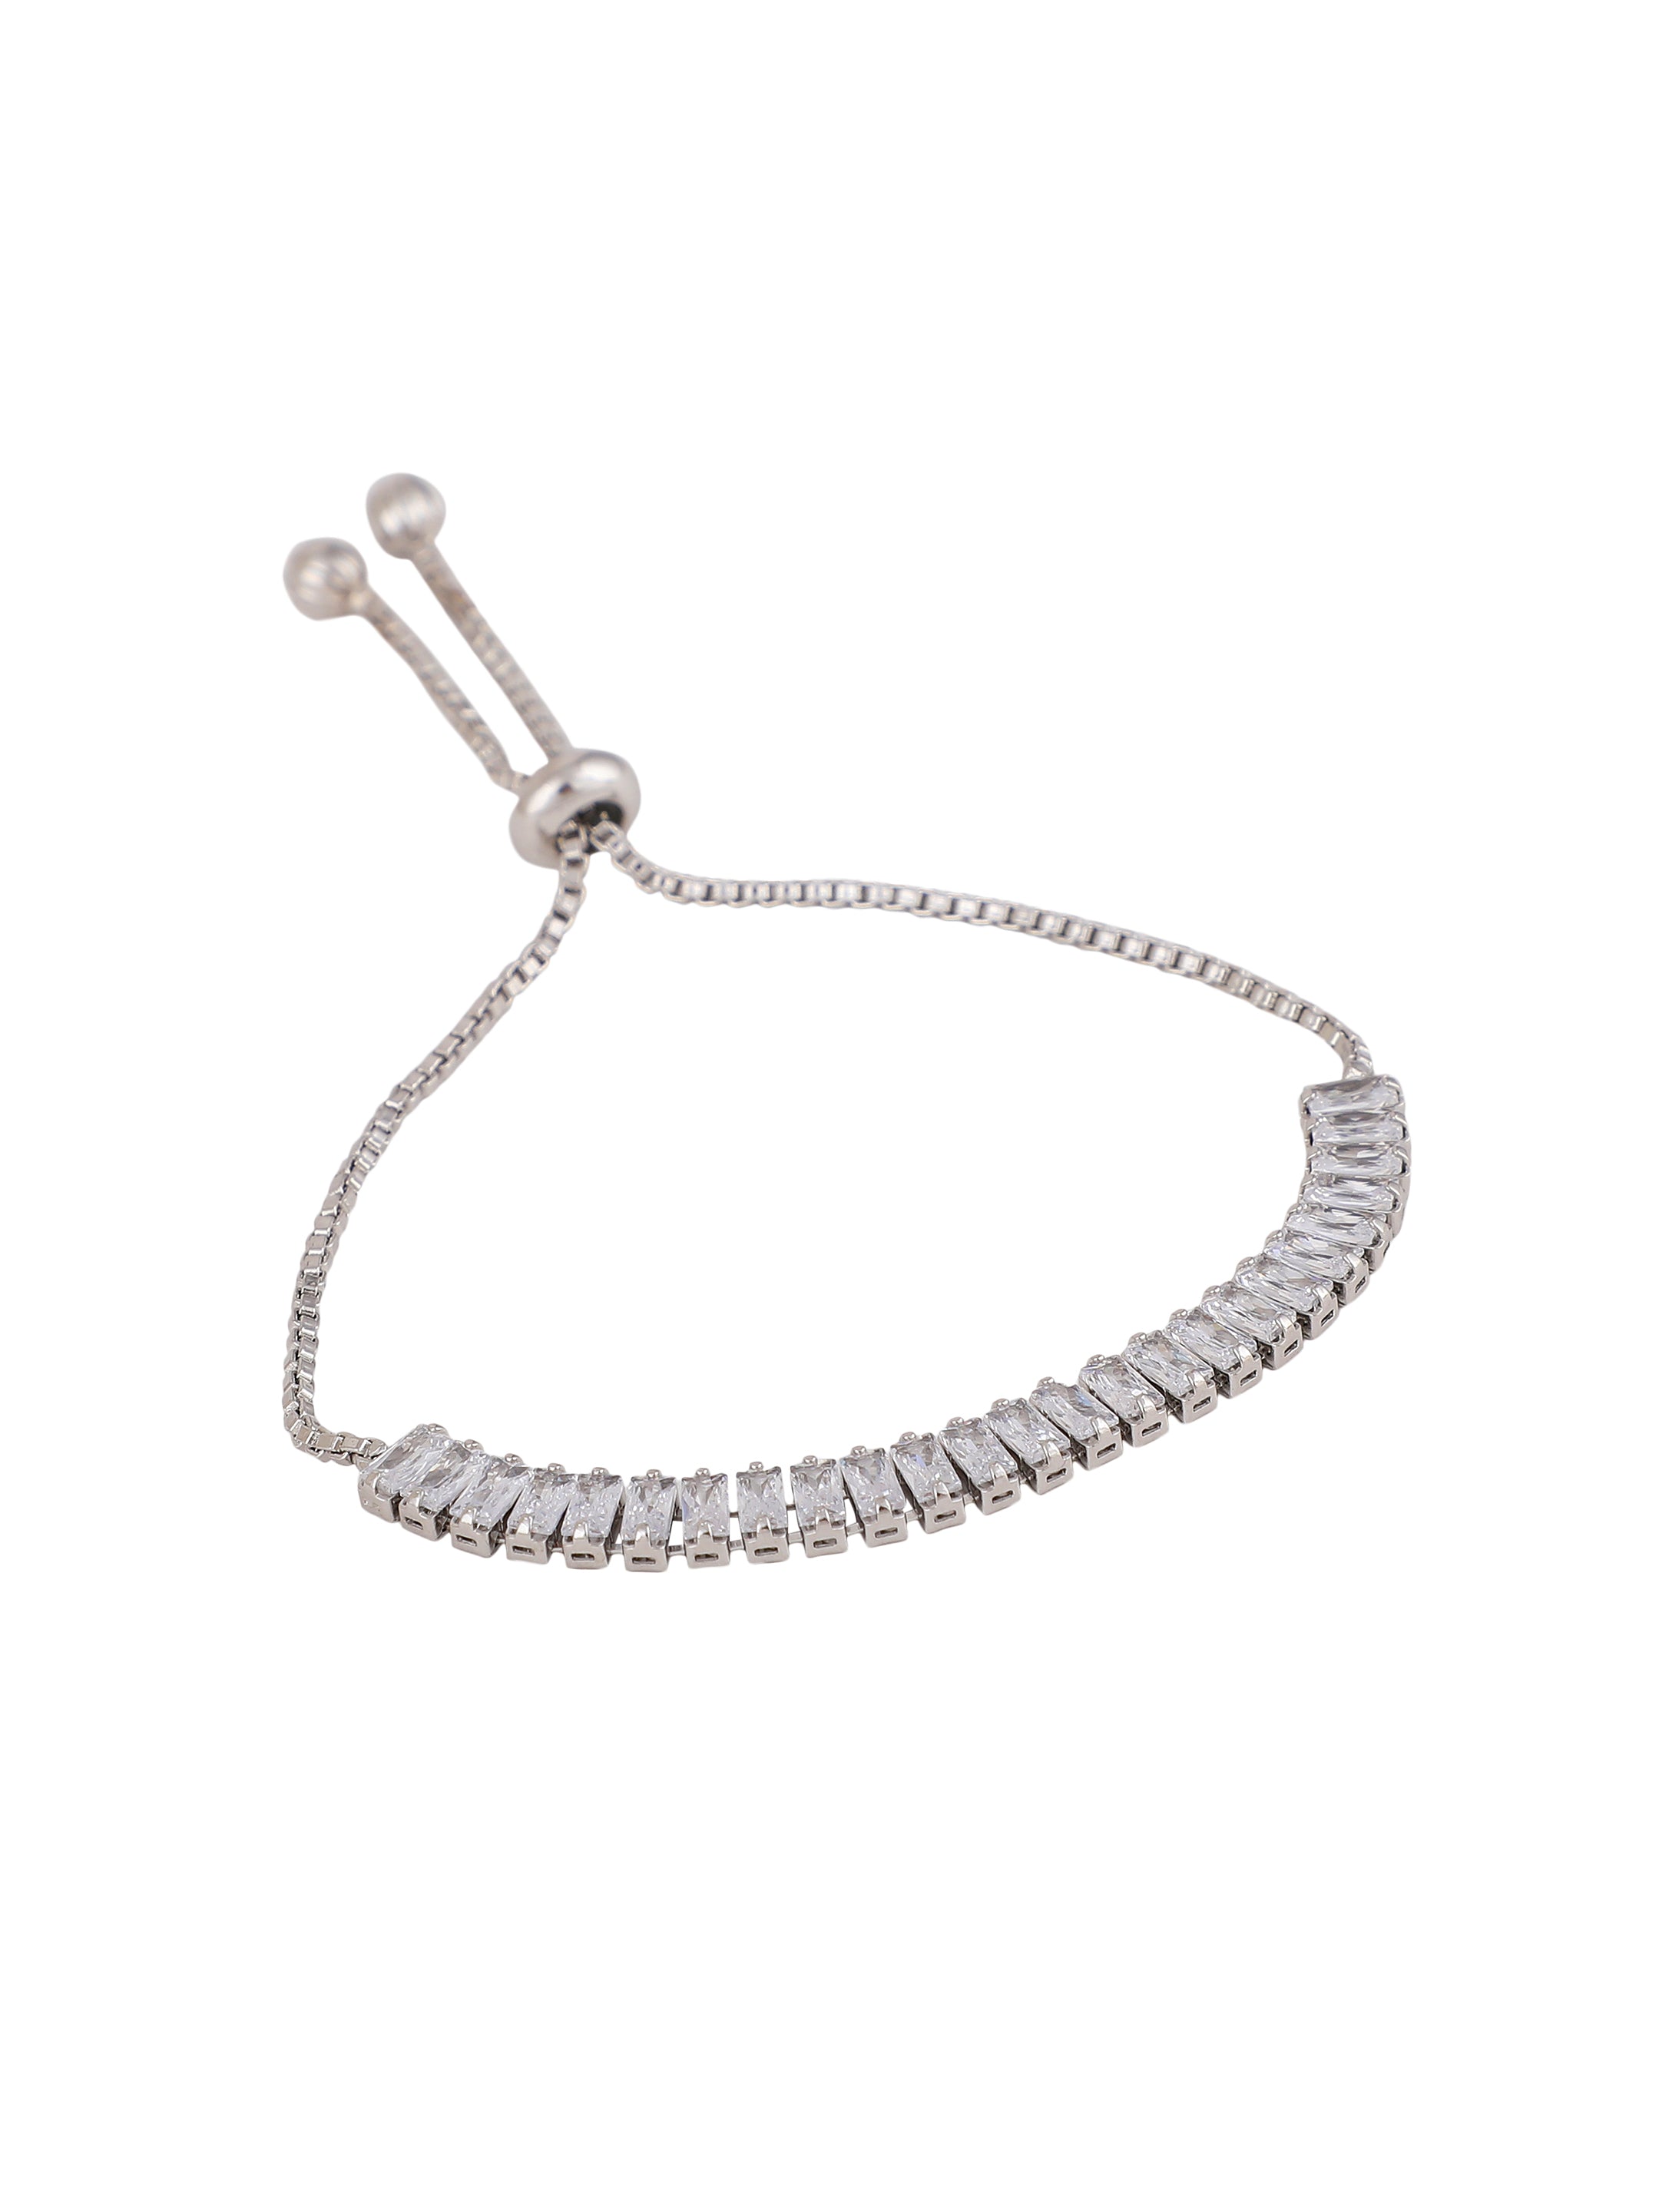 Women's Shinning Ad Rose Silver Plated Bracelet - Zaffre Collections